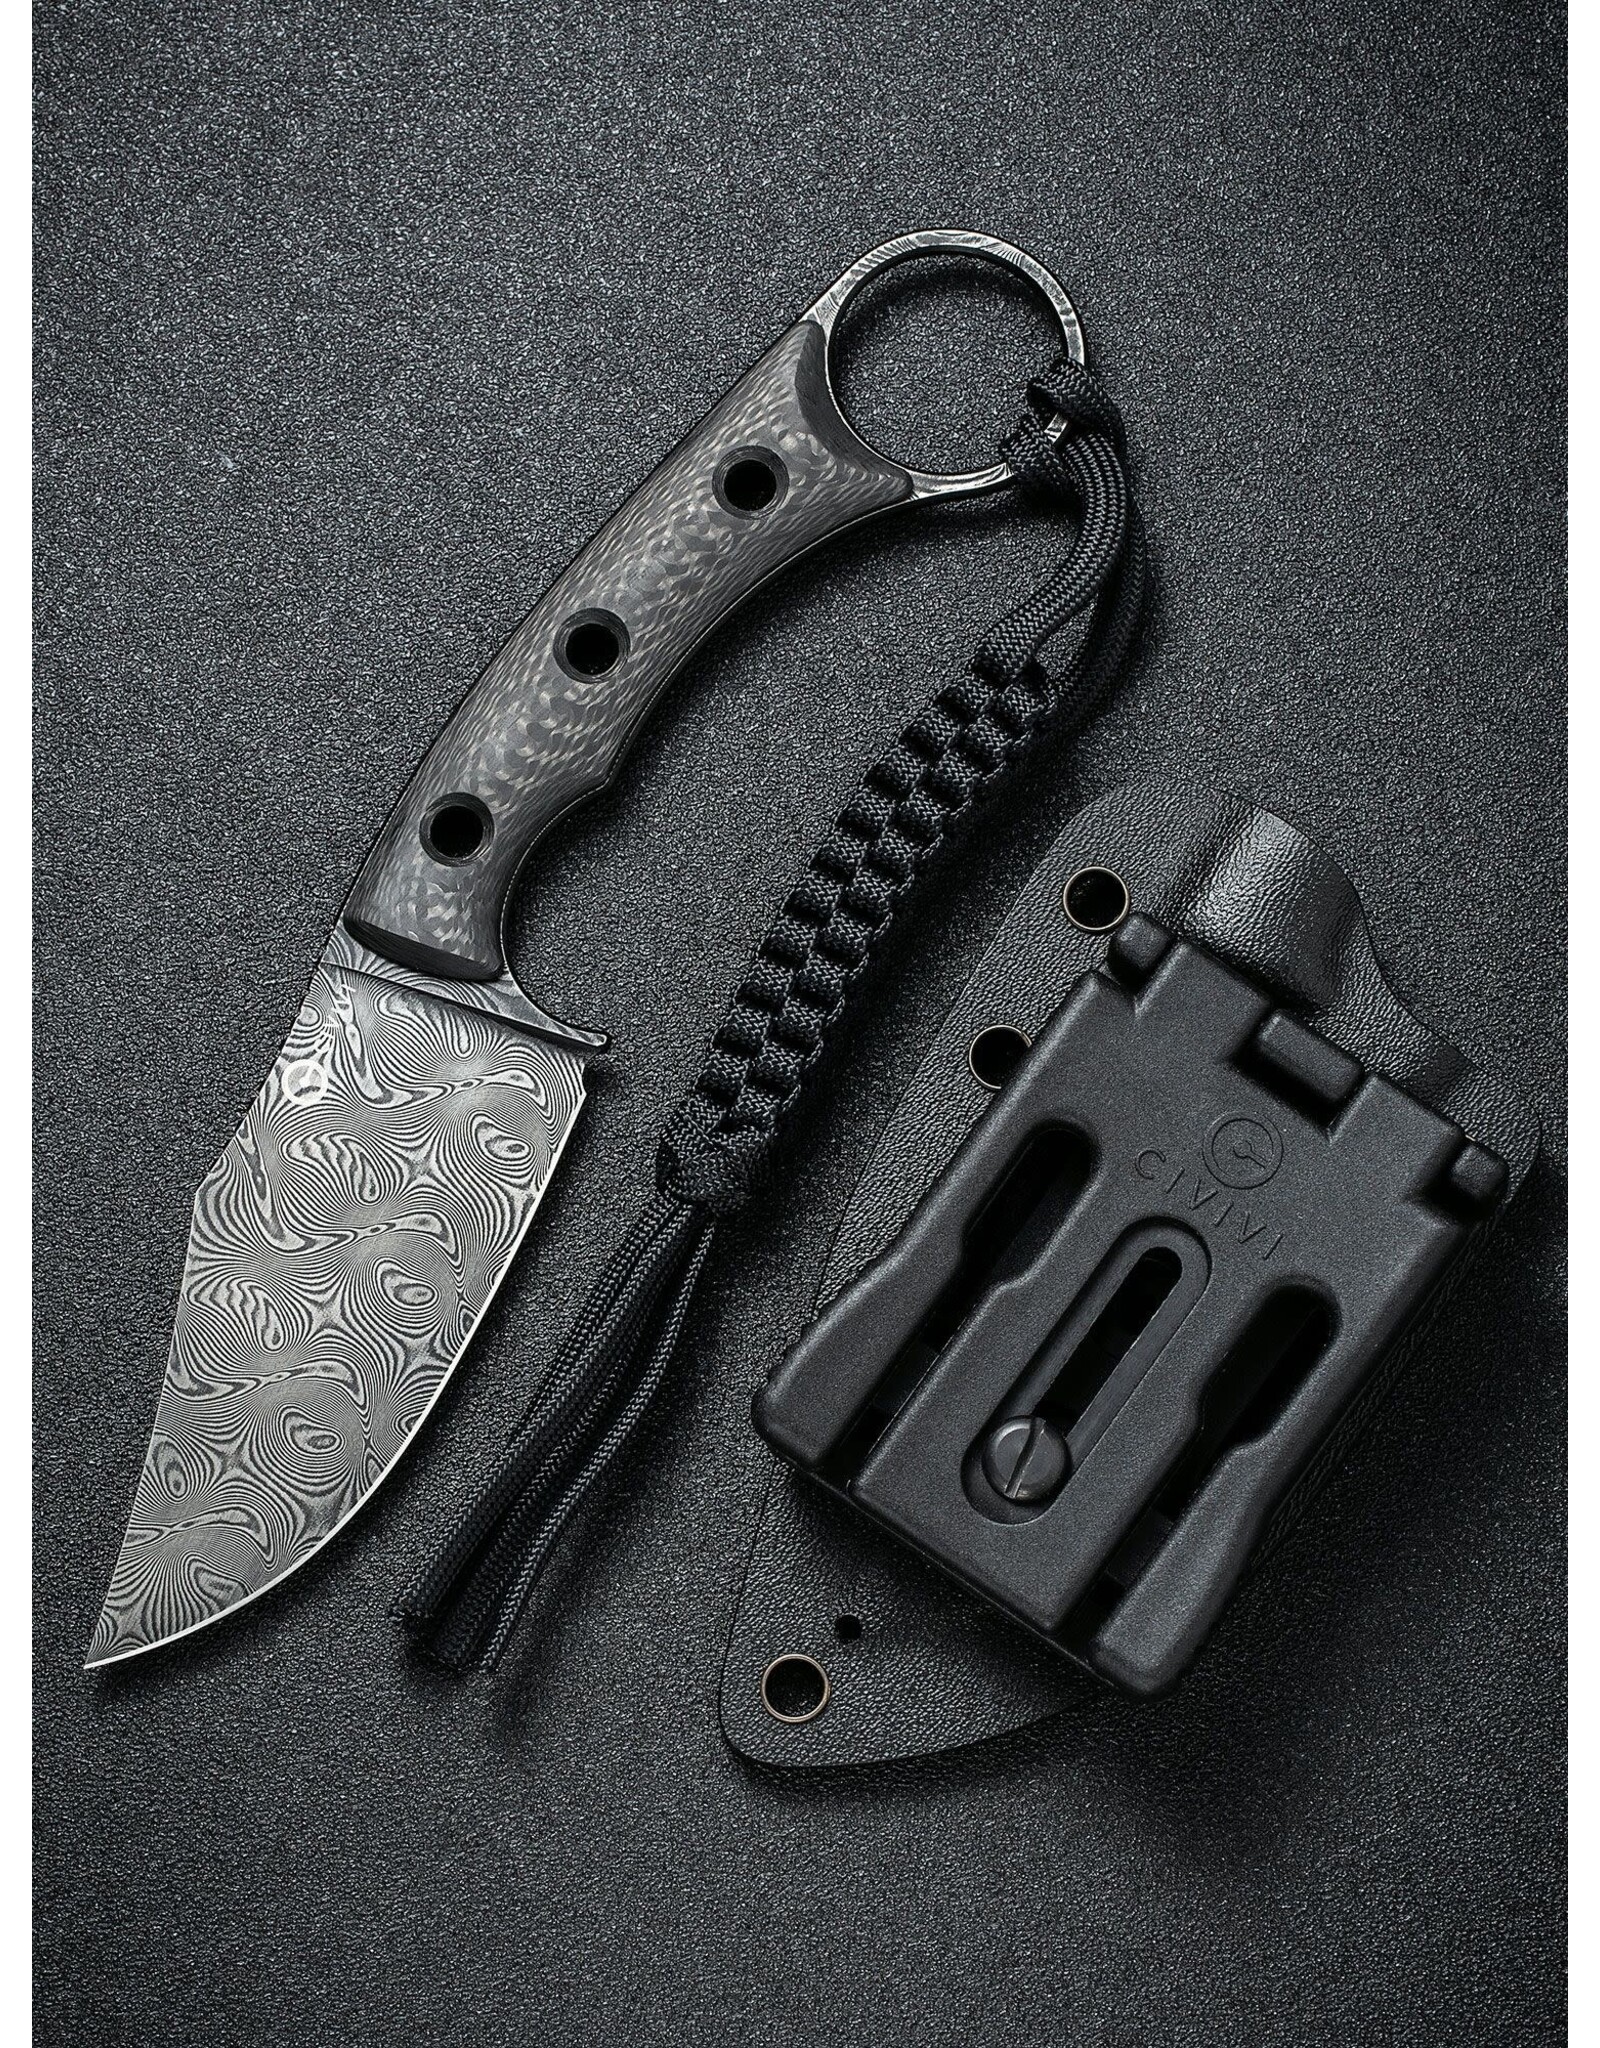 Civivi CIVIVI Knives Midwatch Fixed Blade Knife 3.39" Damascus Clip Point, Twill Carbon Fiber Handles with Pinky Ring, Kydex Sheath - C20059B-DS1